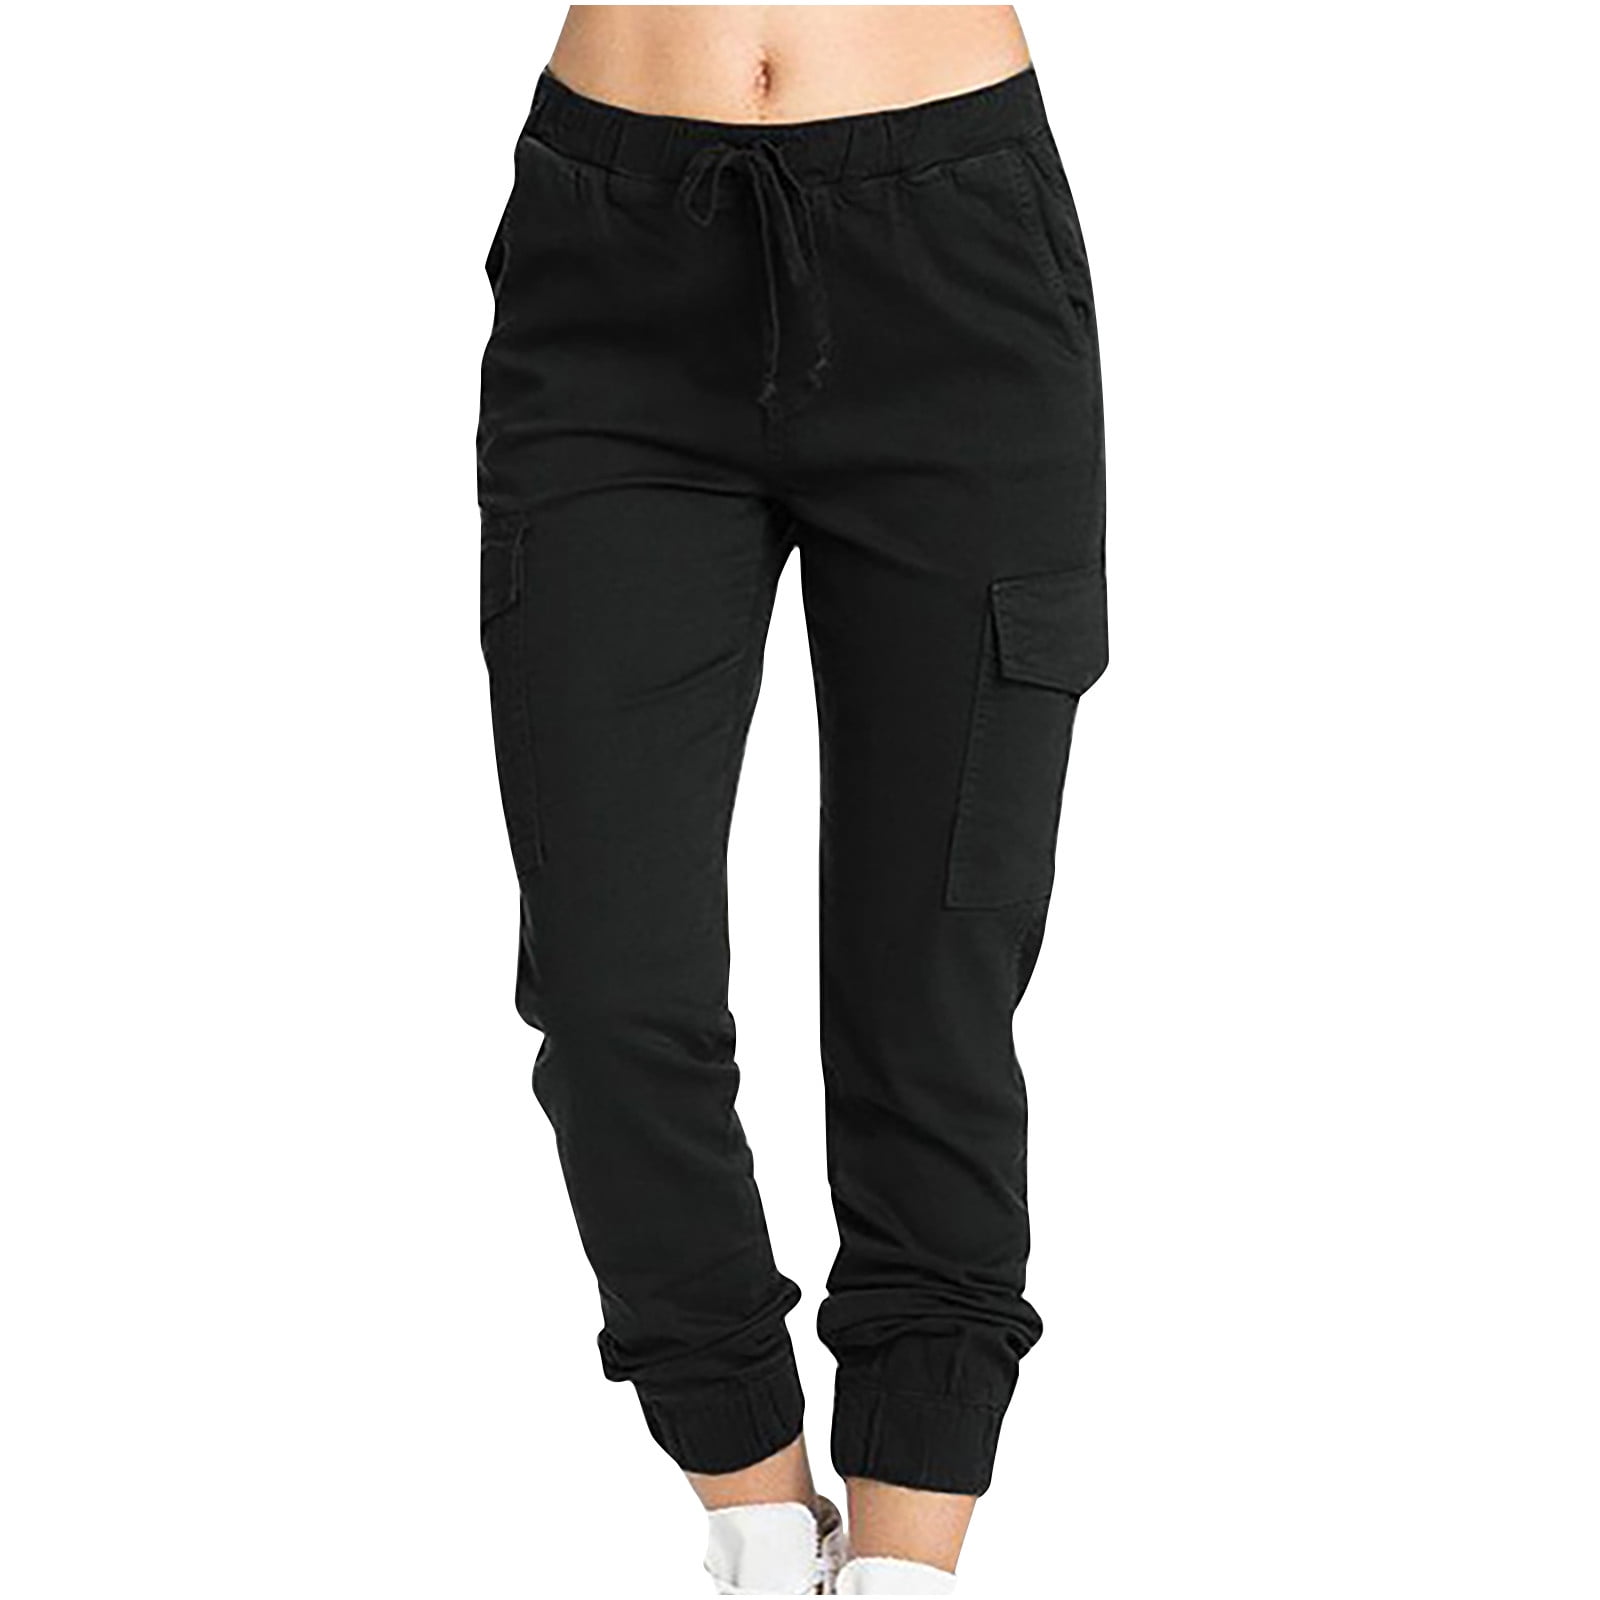 BUIgtTklOP Pants For Women Clearance Plus Size Drawstring Casual